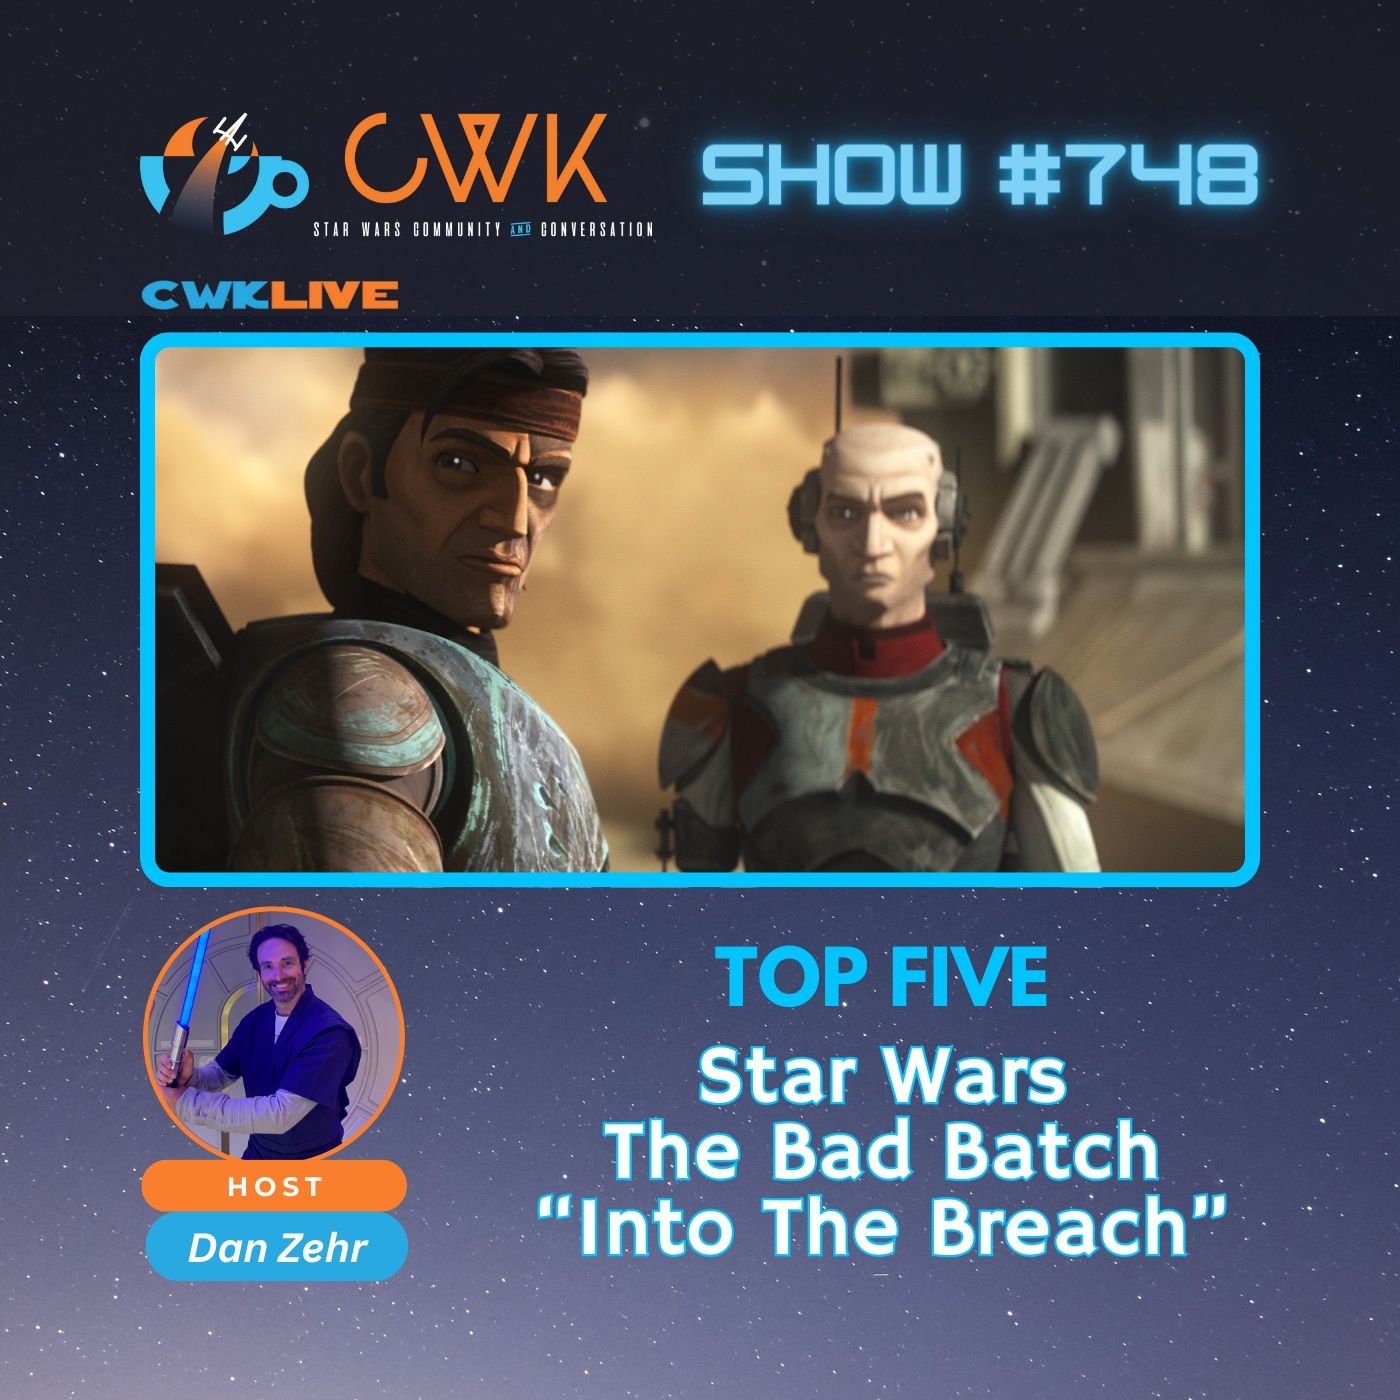 CWK Show #748 LIVE: Top Five Moments from The Bad Batch "Into The Breach"